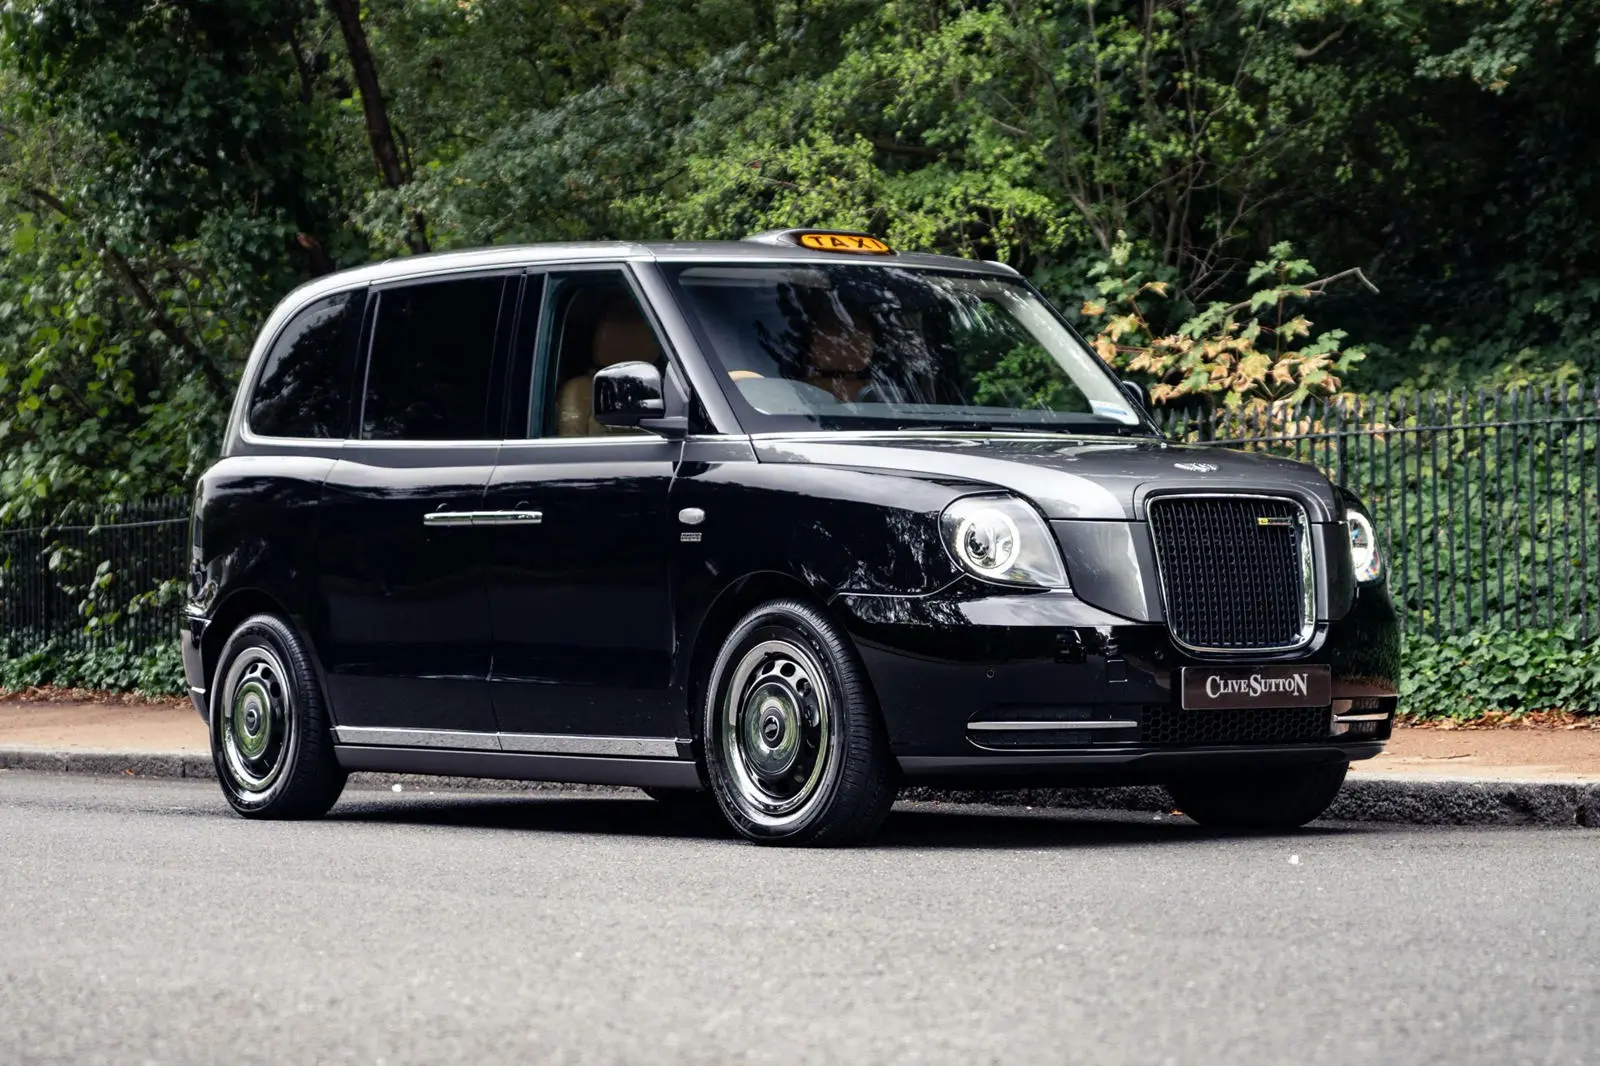 luxury taxi london - How do you become a chauffeur in London